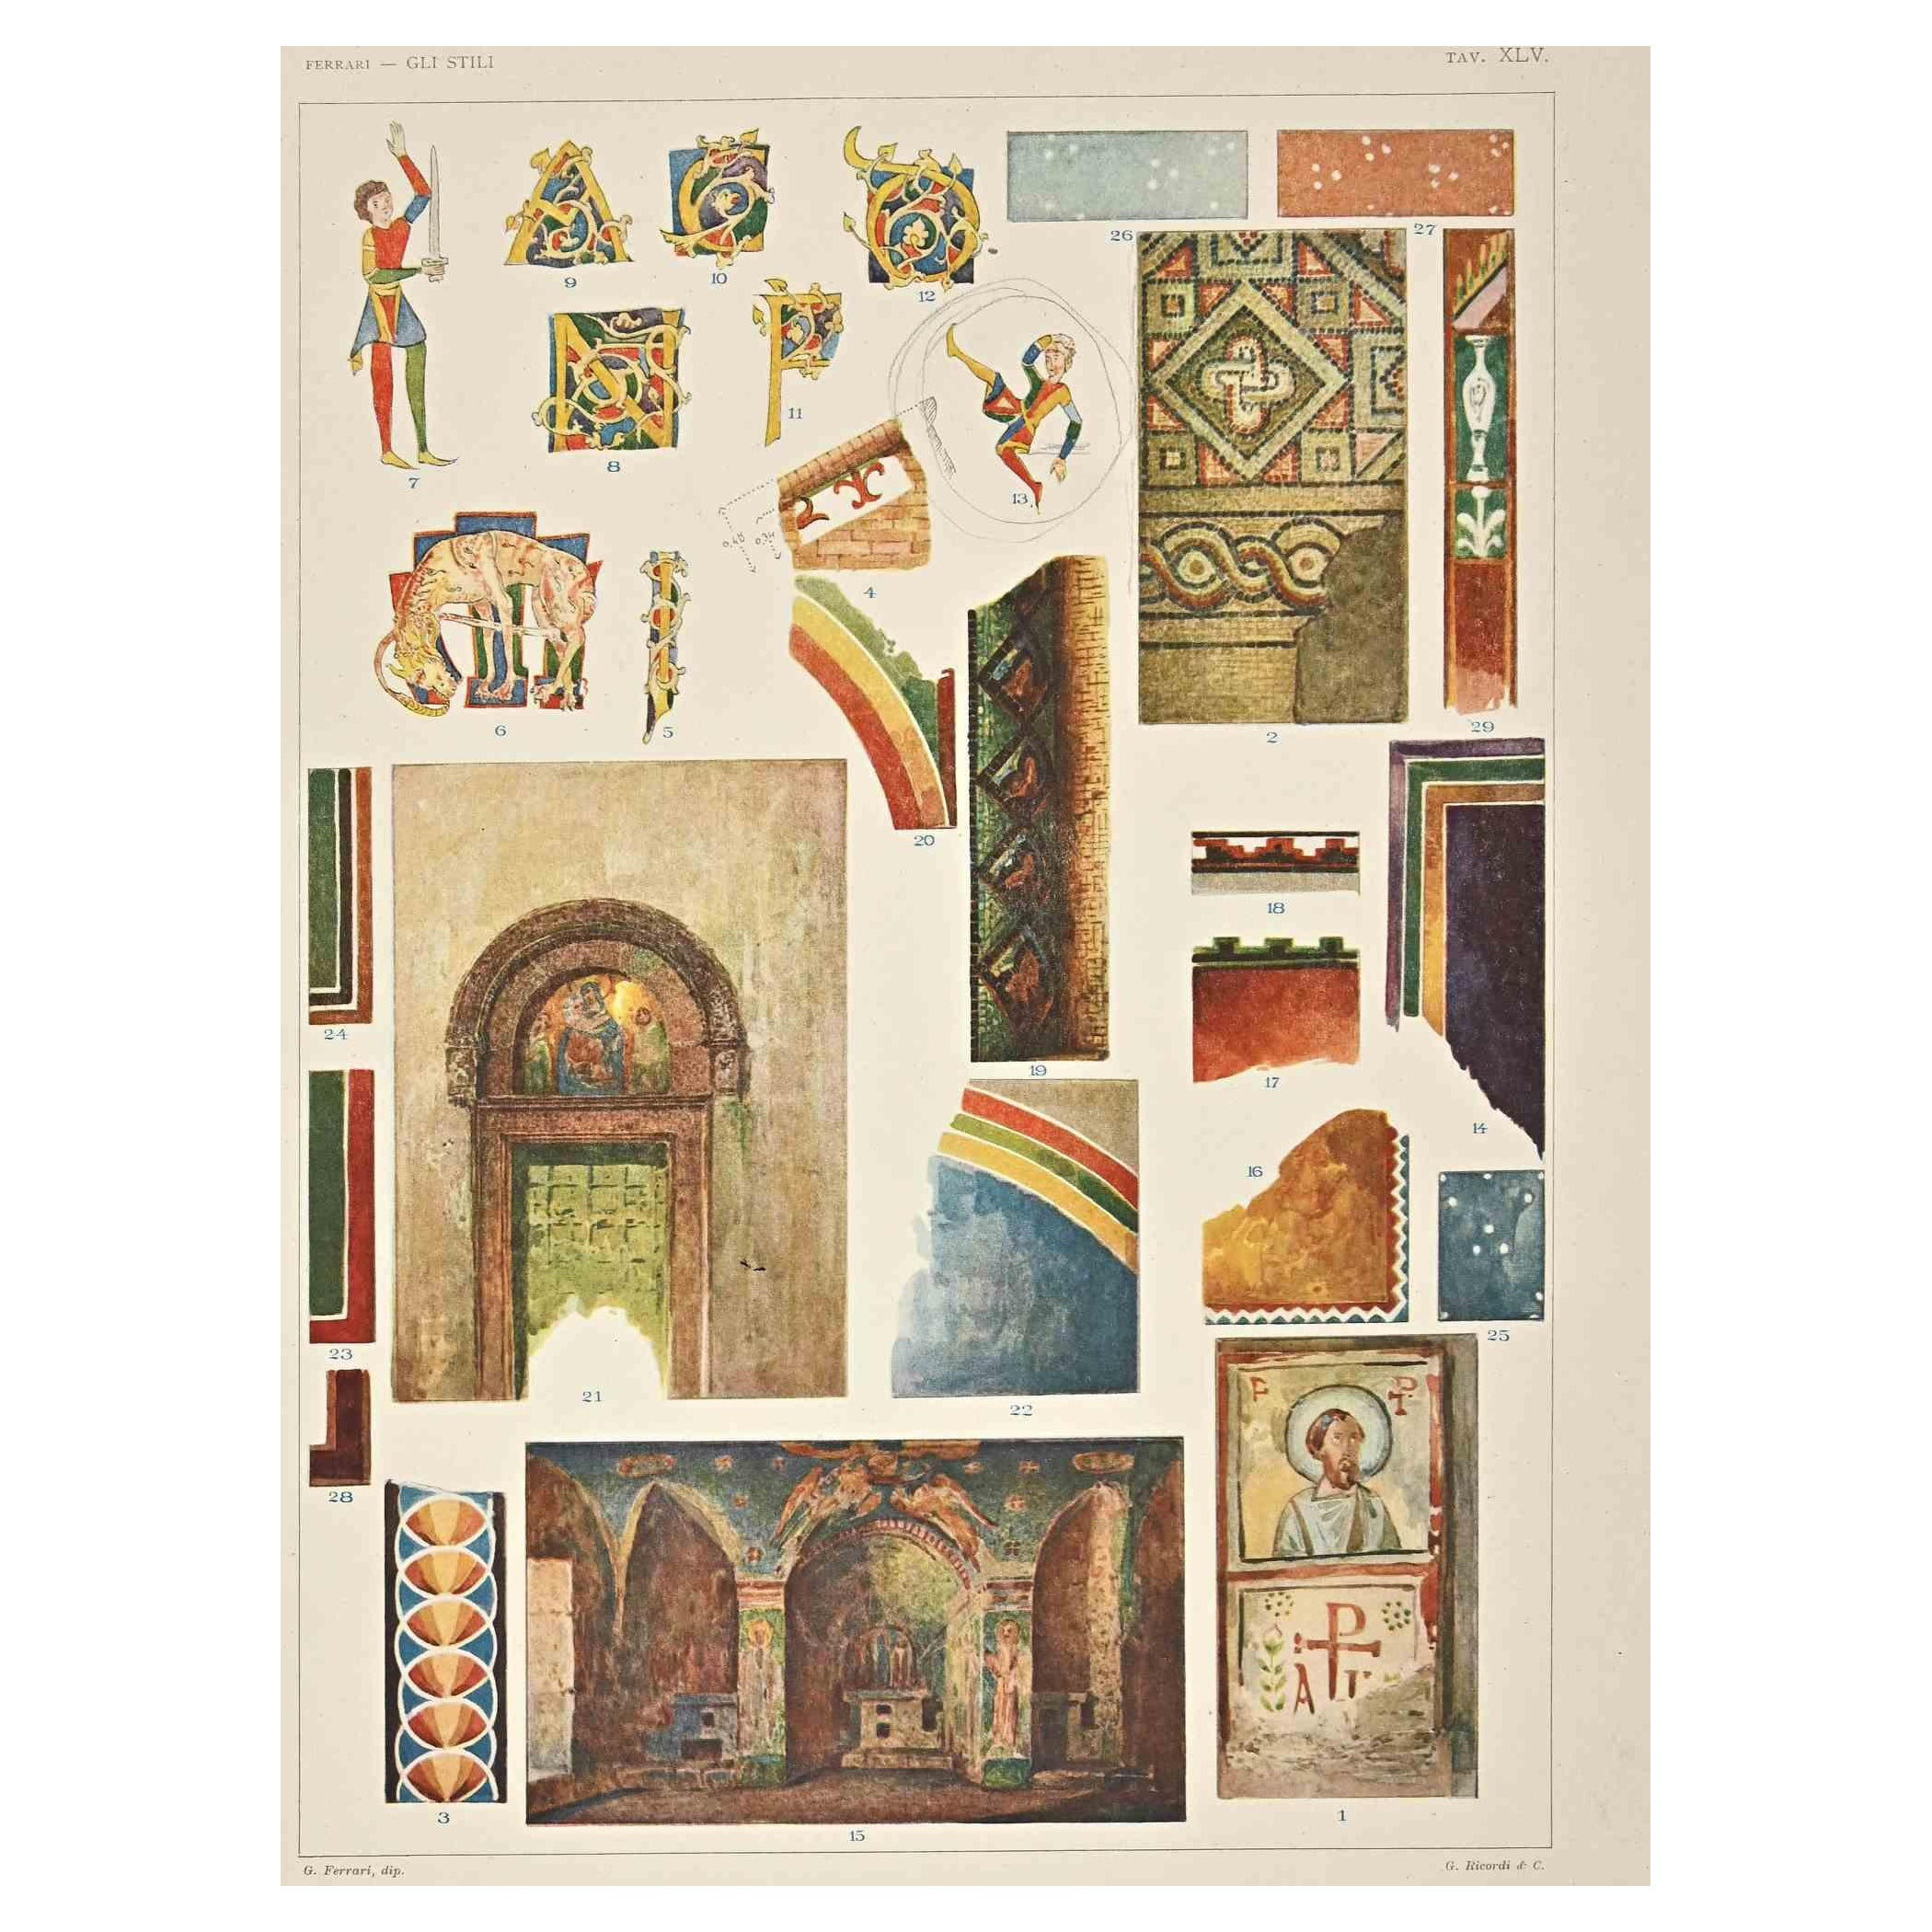 Decorative Motifs - Byzantine Styles is a print on ivory-colored paper realized by Andrea Alessio in the early 20th Century. Signed on the plate on the lower.

Vintage Chromolithograph.

Very good conditions.

The artwork represents Decorative